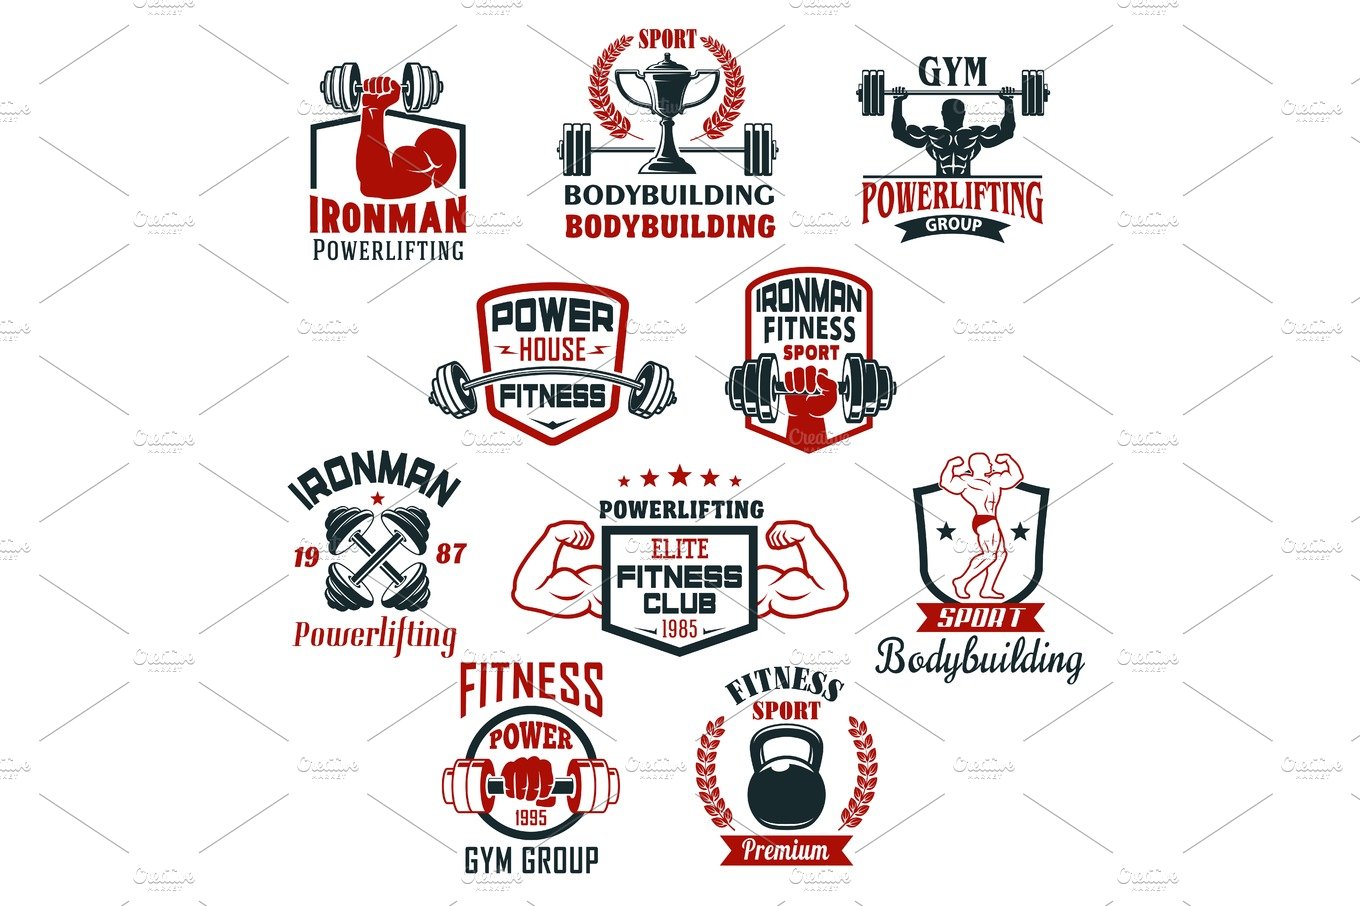 Bodybuilding gym or powerlifting club vector icons cover image.